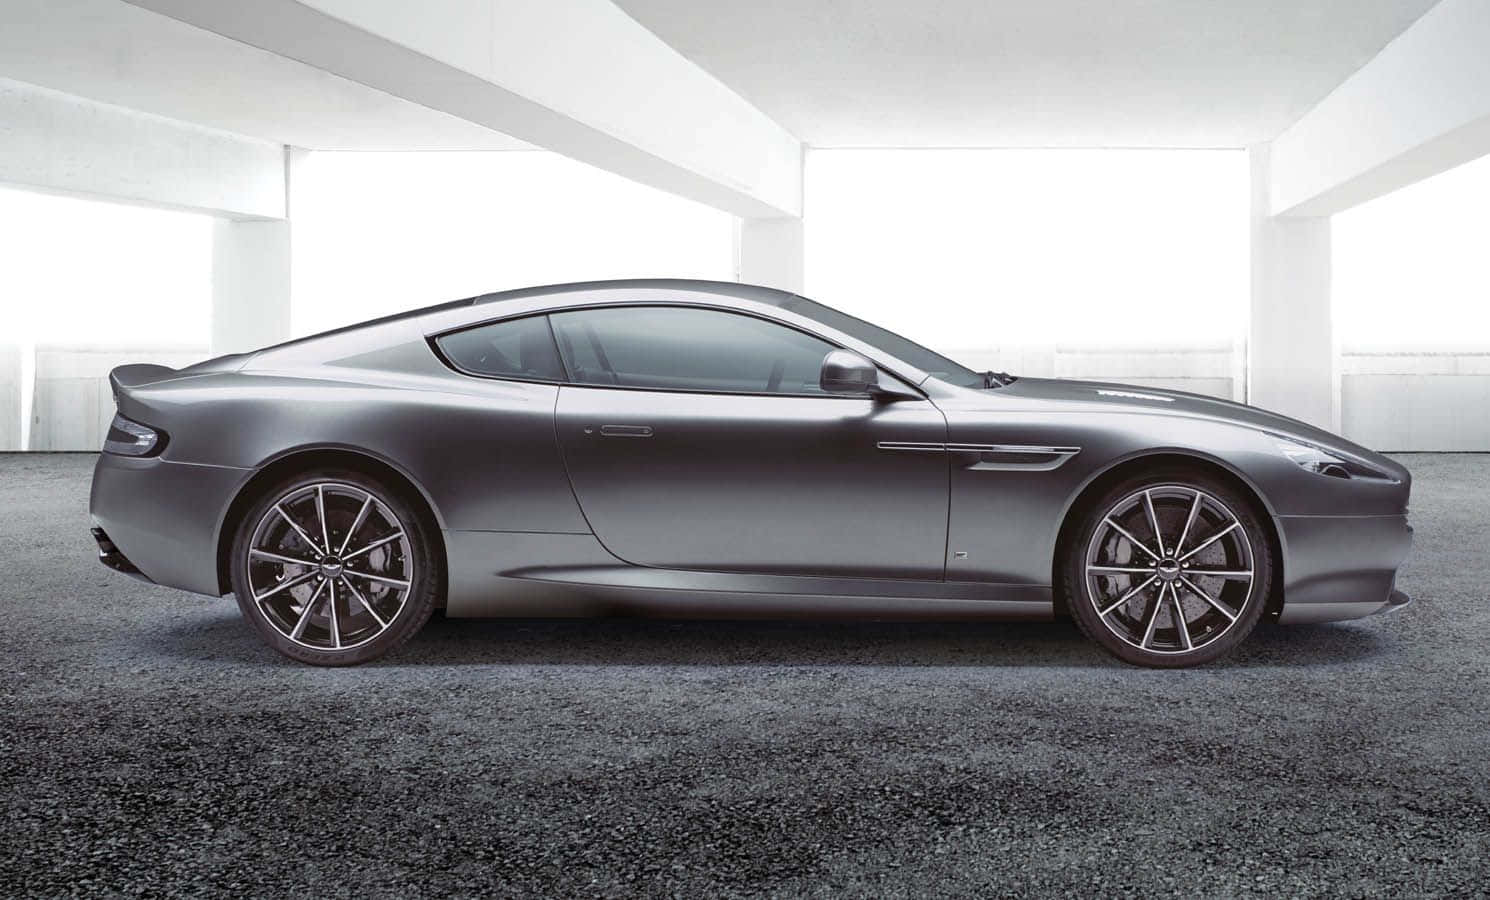 Aston Martin DB9 - The Epitome of Luxury and Performance Wallpaper